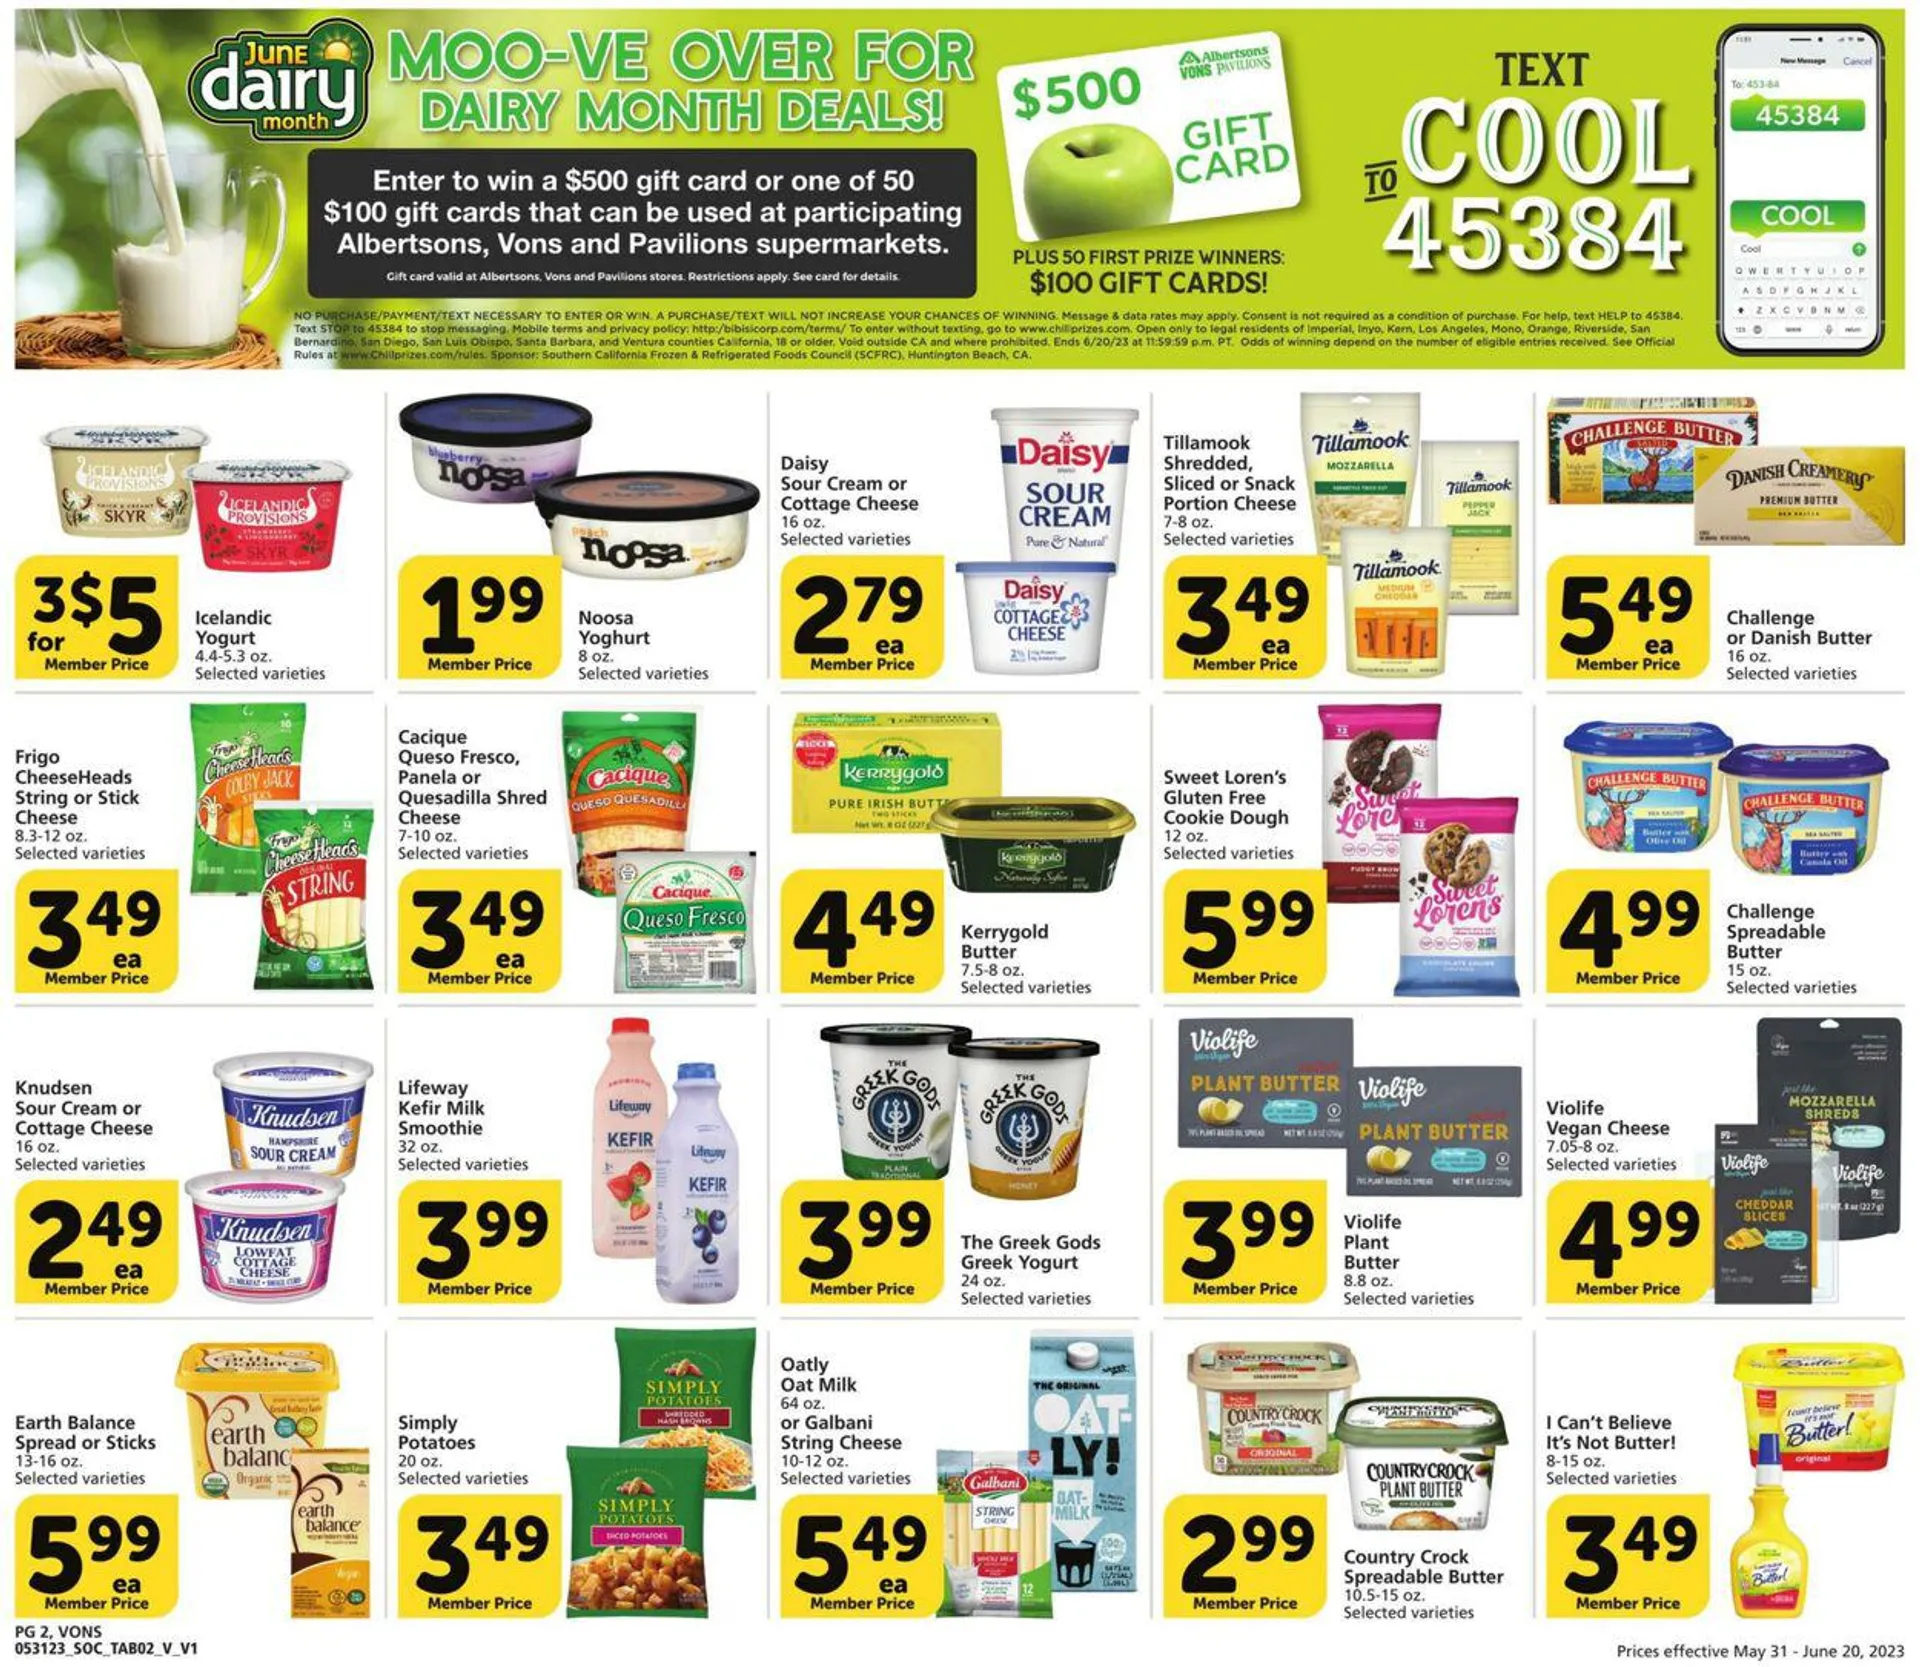 Vons Current weekly ad - 2